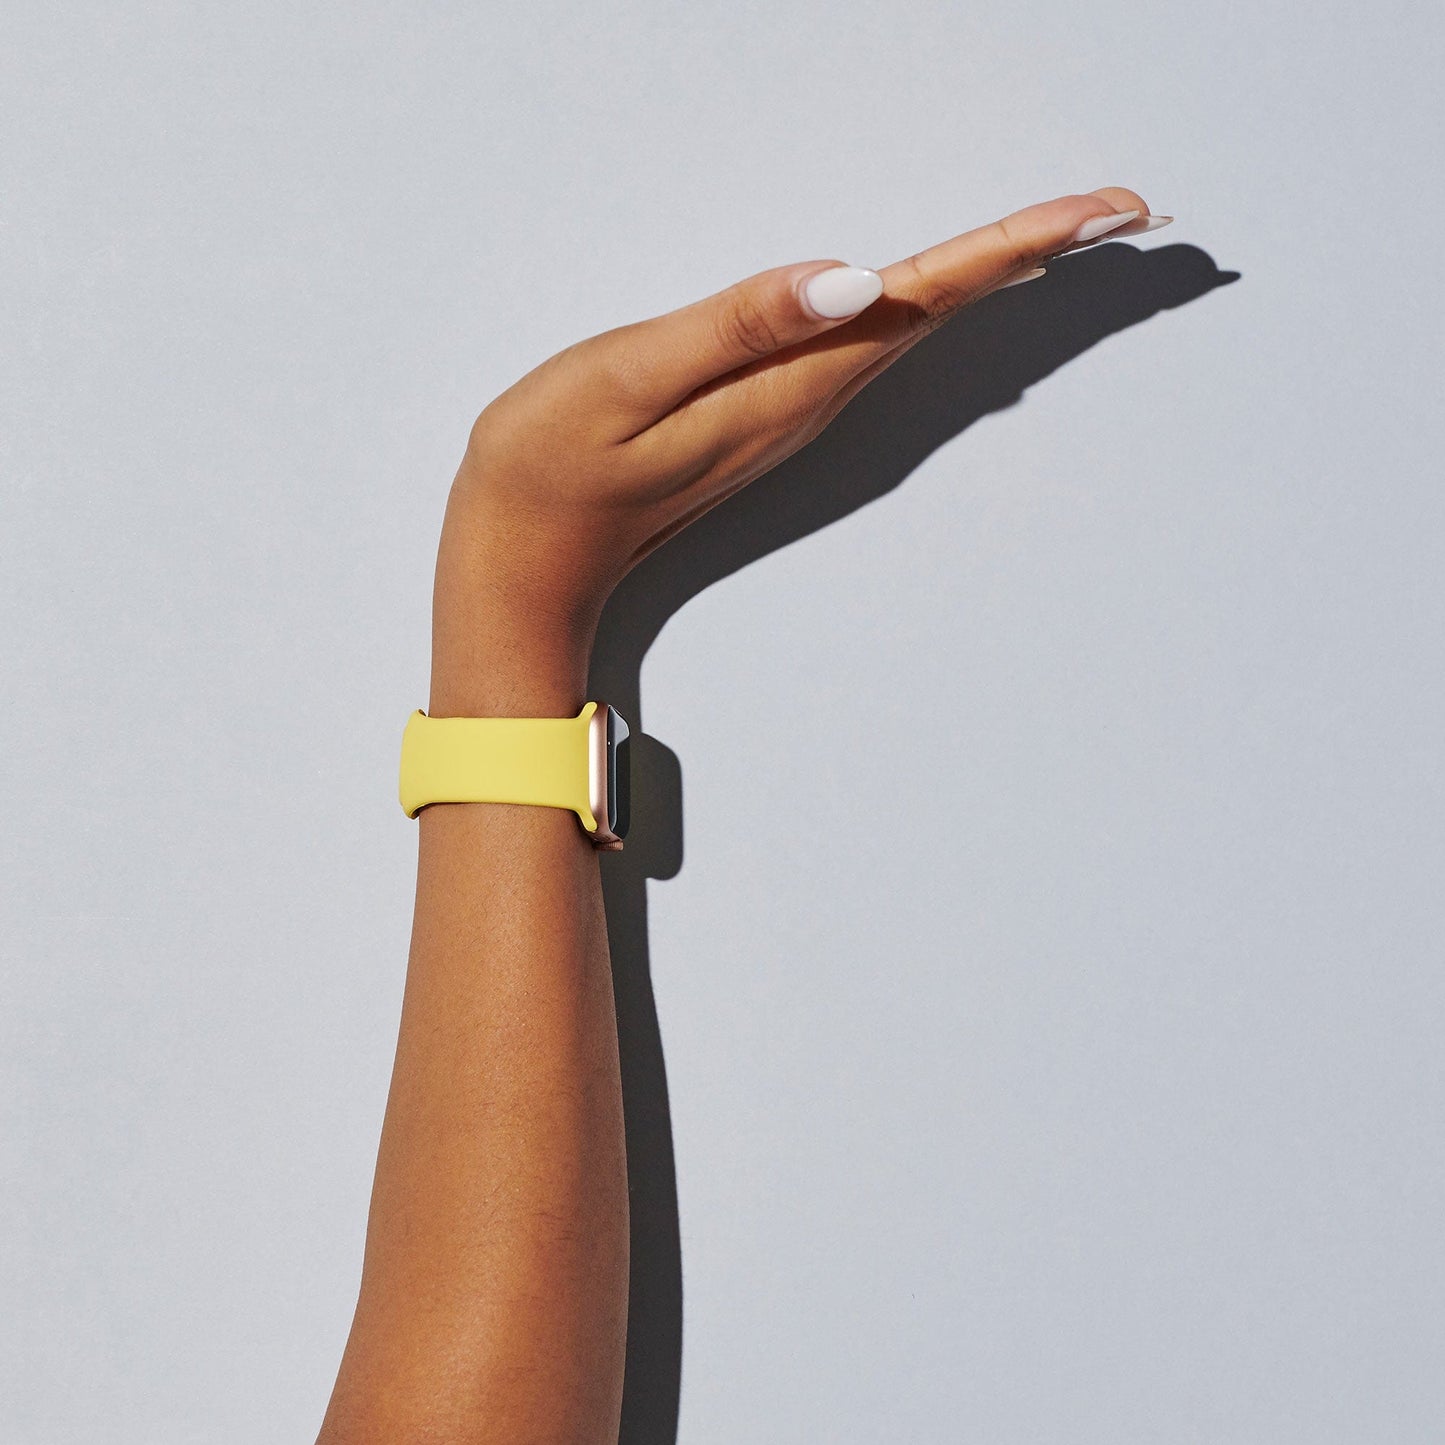 Canary Yellow Sport Band for Apple Watch